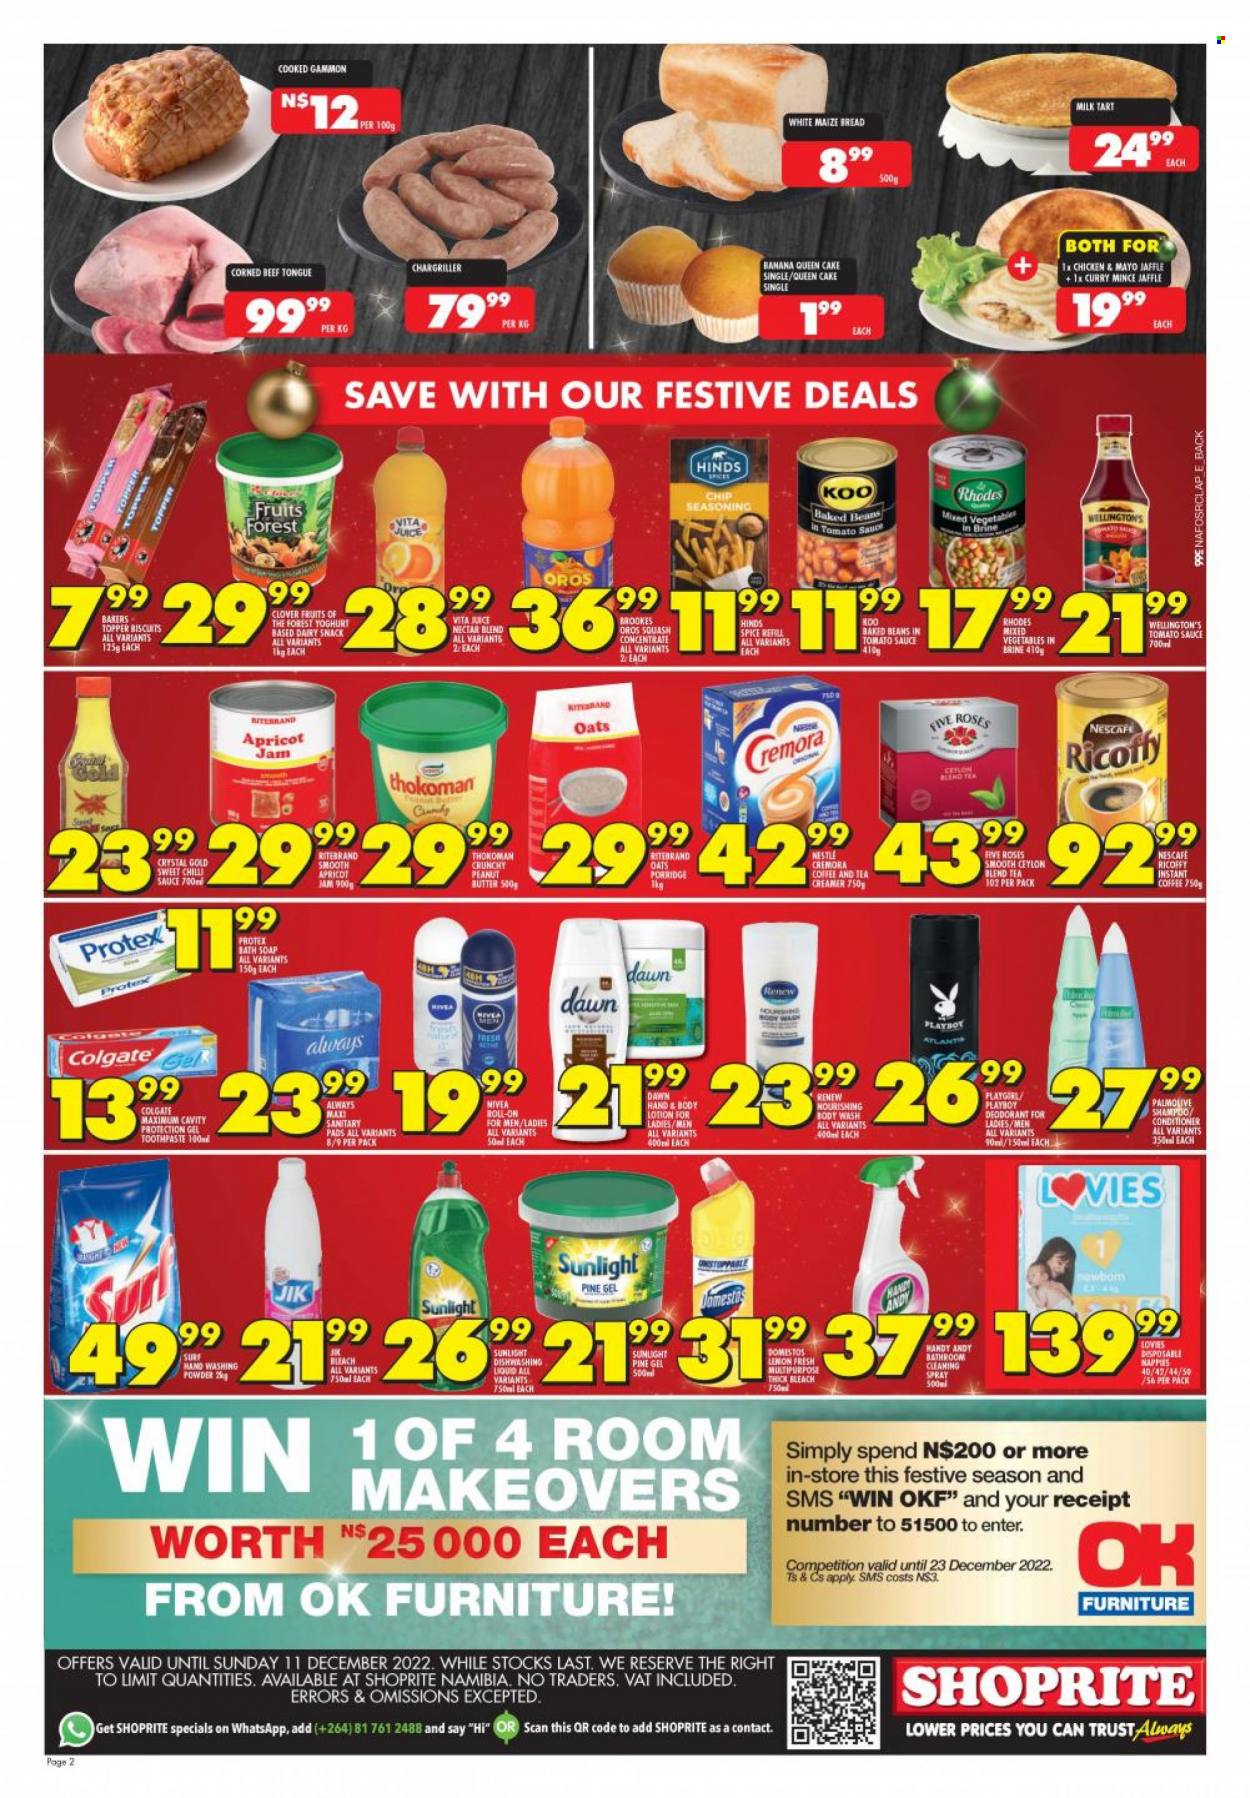 thumbnail - Shoprite catalogue  - 28/11/2022 - 11/12/2022 - Sales products - bread, tart, cake, milk tart, beans, corned beef, gammon, milk, butter, creamer, coffee and tea creamer, mixed vegetables, snack, biscuit, oats, baked beans, Koo, spice, Hinds, apricot jam, fruit jam, juice, Oros, tea, Ricoffy, Nescafé, beef meat, Domestos, bleach, Sunlight, body wash, shampoo, Nivea, Palmolive, Protex, soap, Colgate, toothpaste, conditioner, body lotion. Page 2.